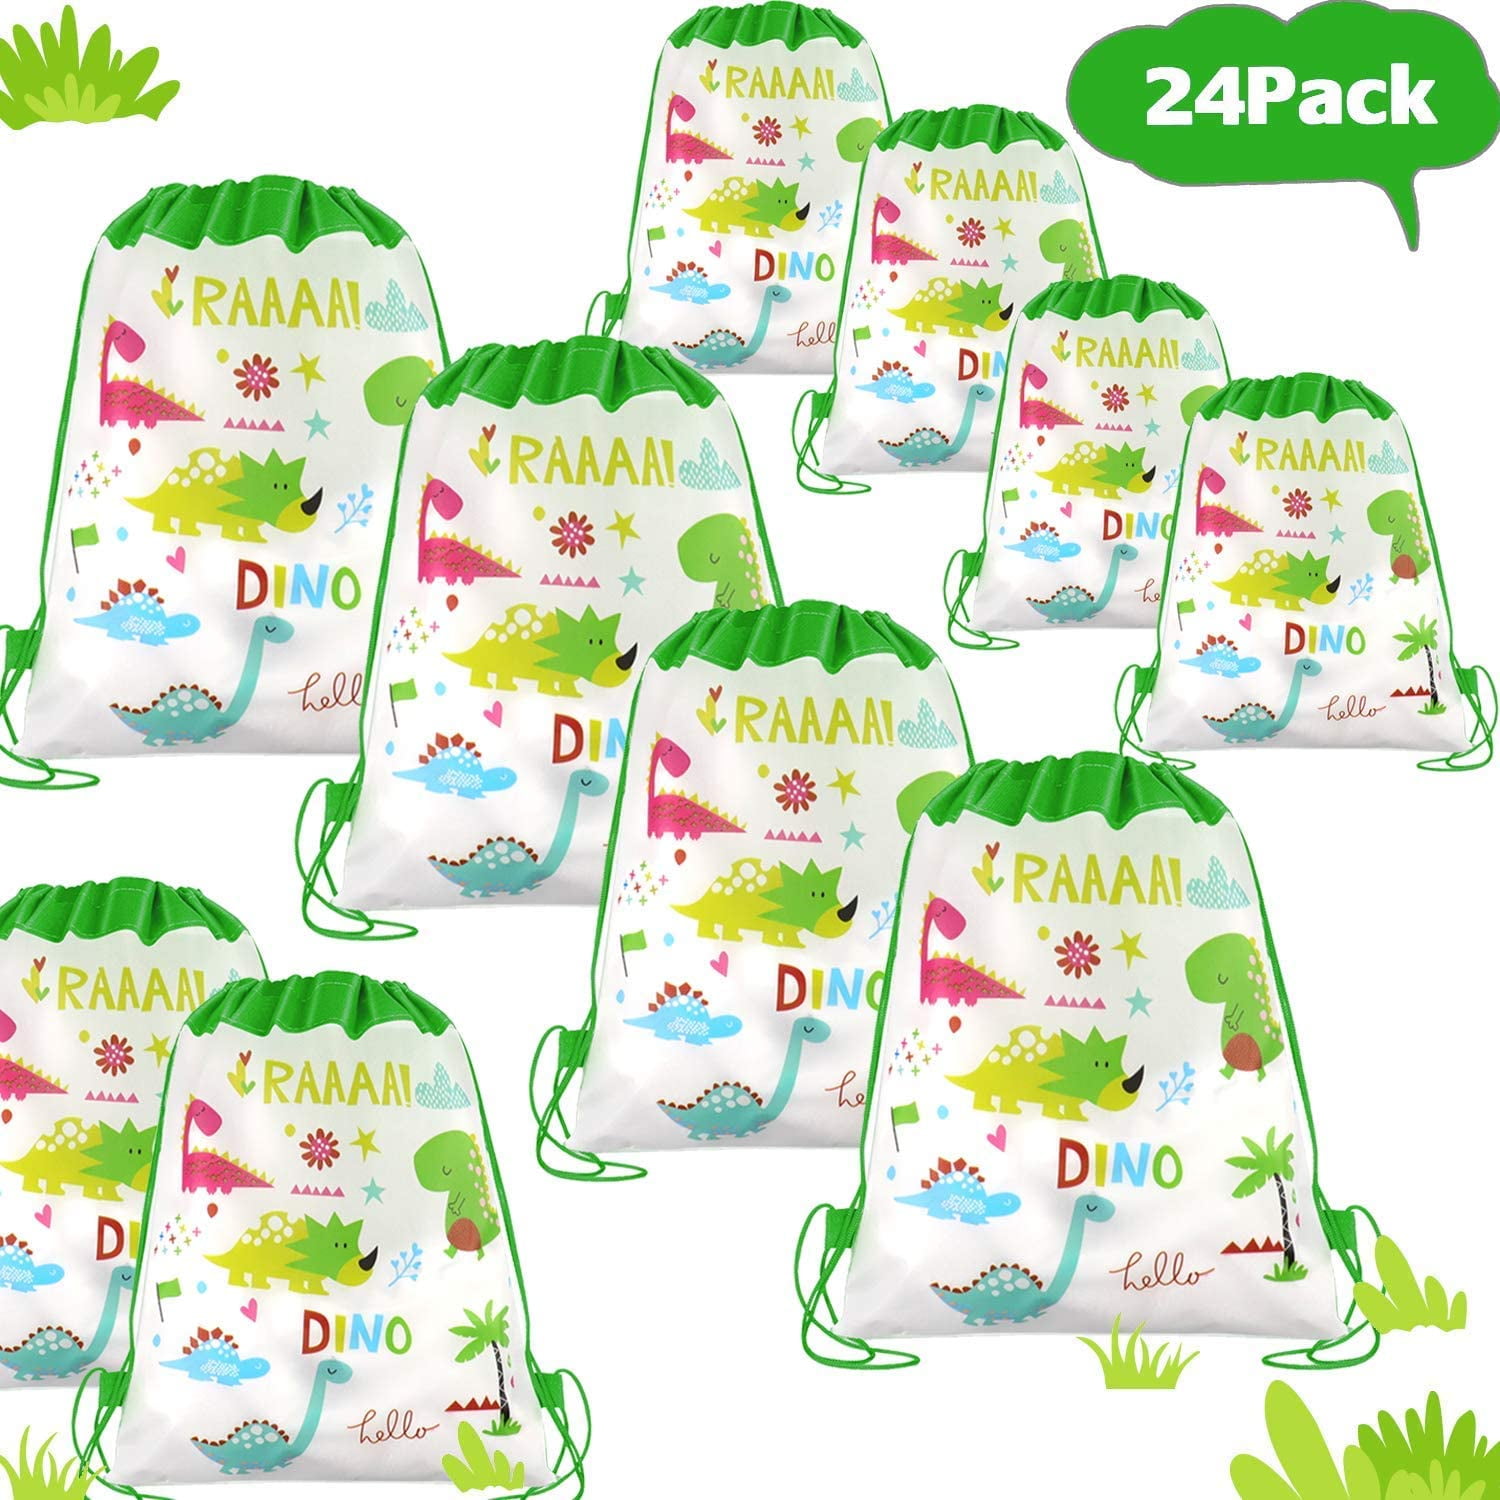 24pcs Dinosaur Figures Party Bag Fillers Goodie Loot Pinata Favour Gifts Toys 